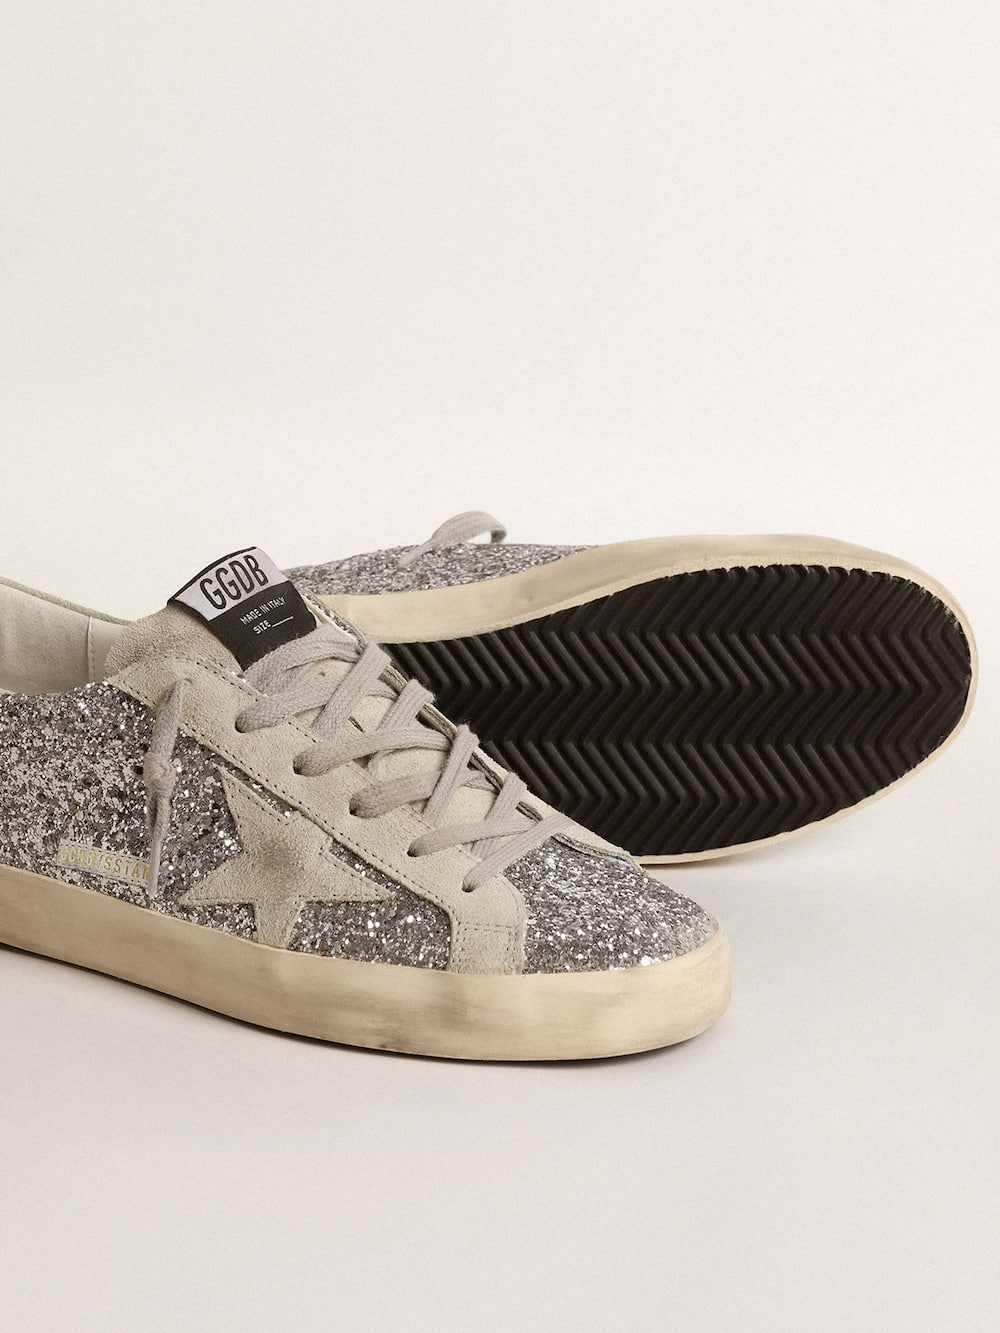 Golden Goose - Women's Super-Star in silver glitter with ice-gray suede star in 